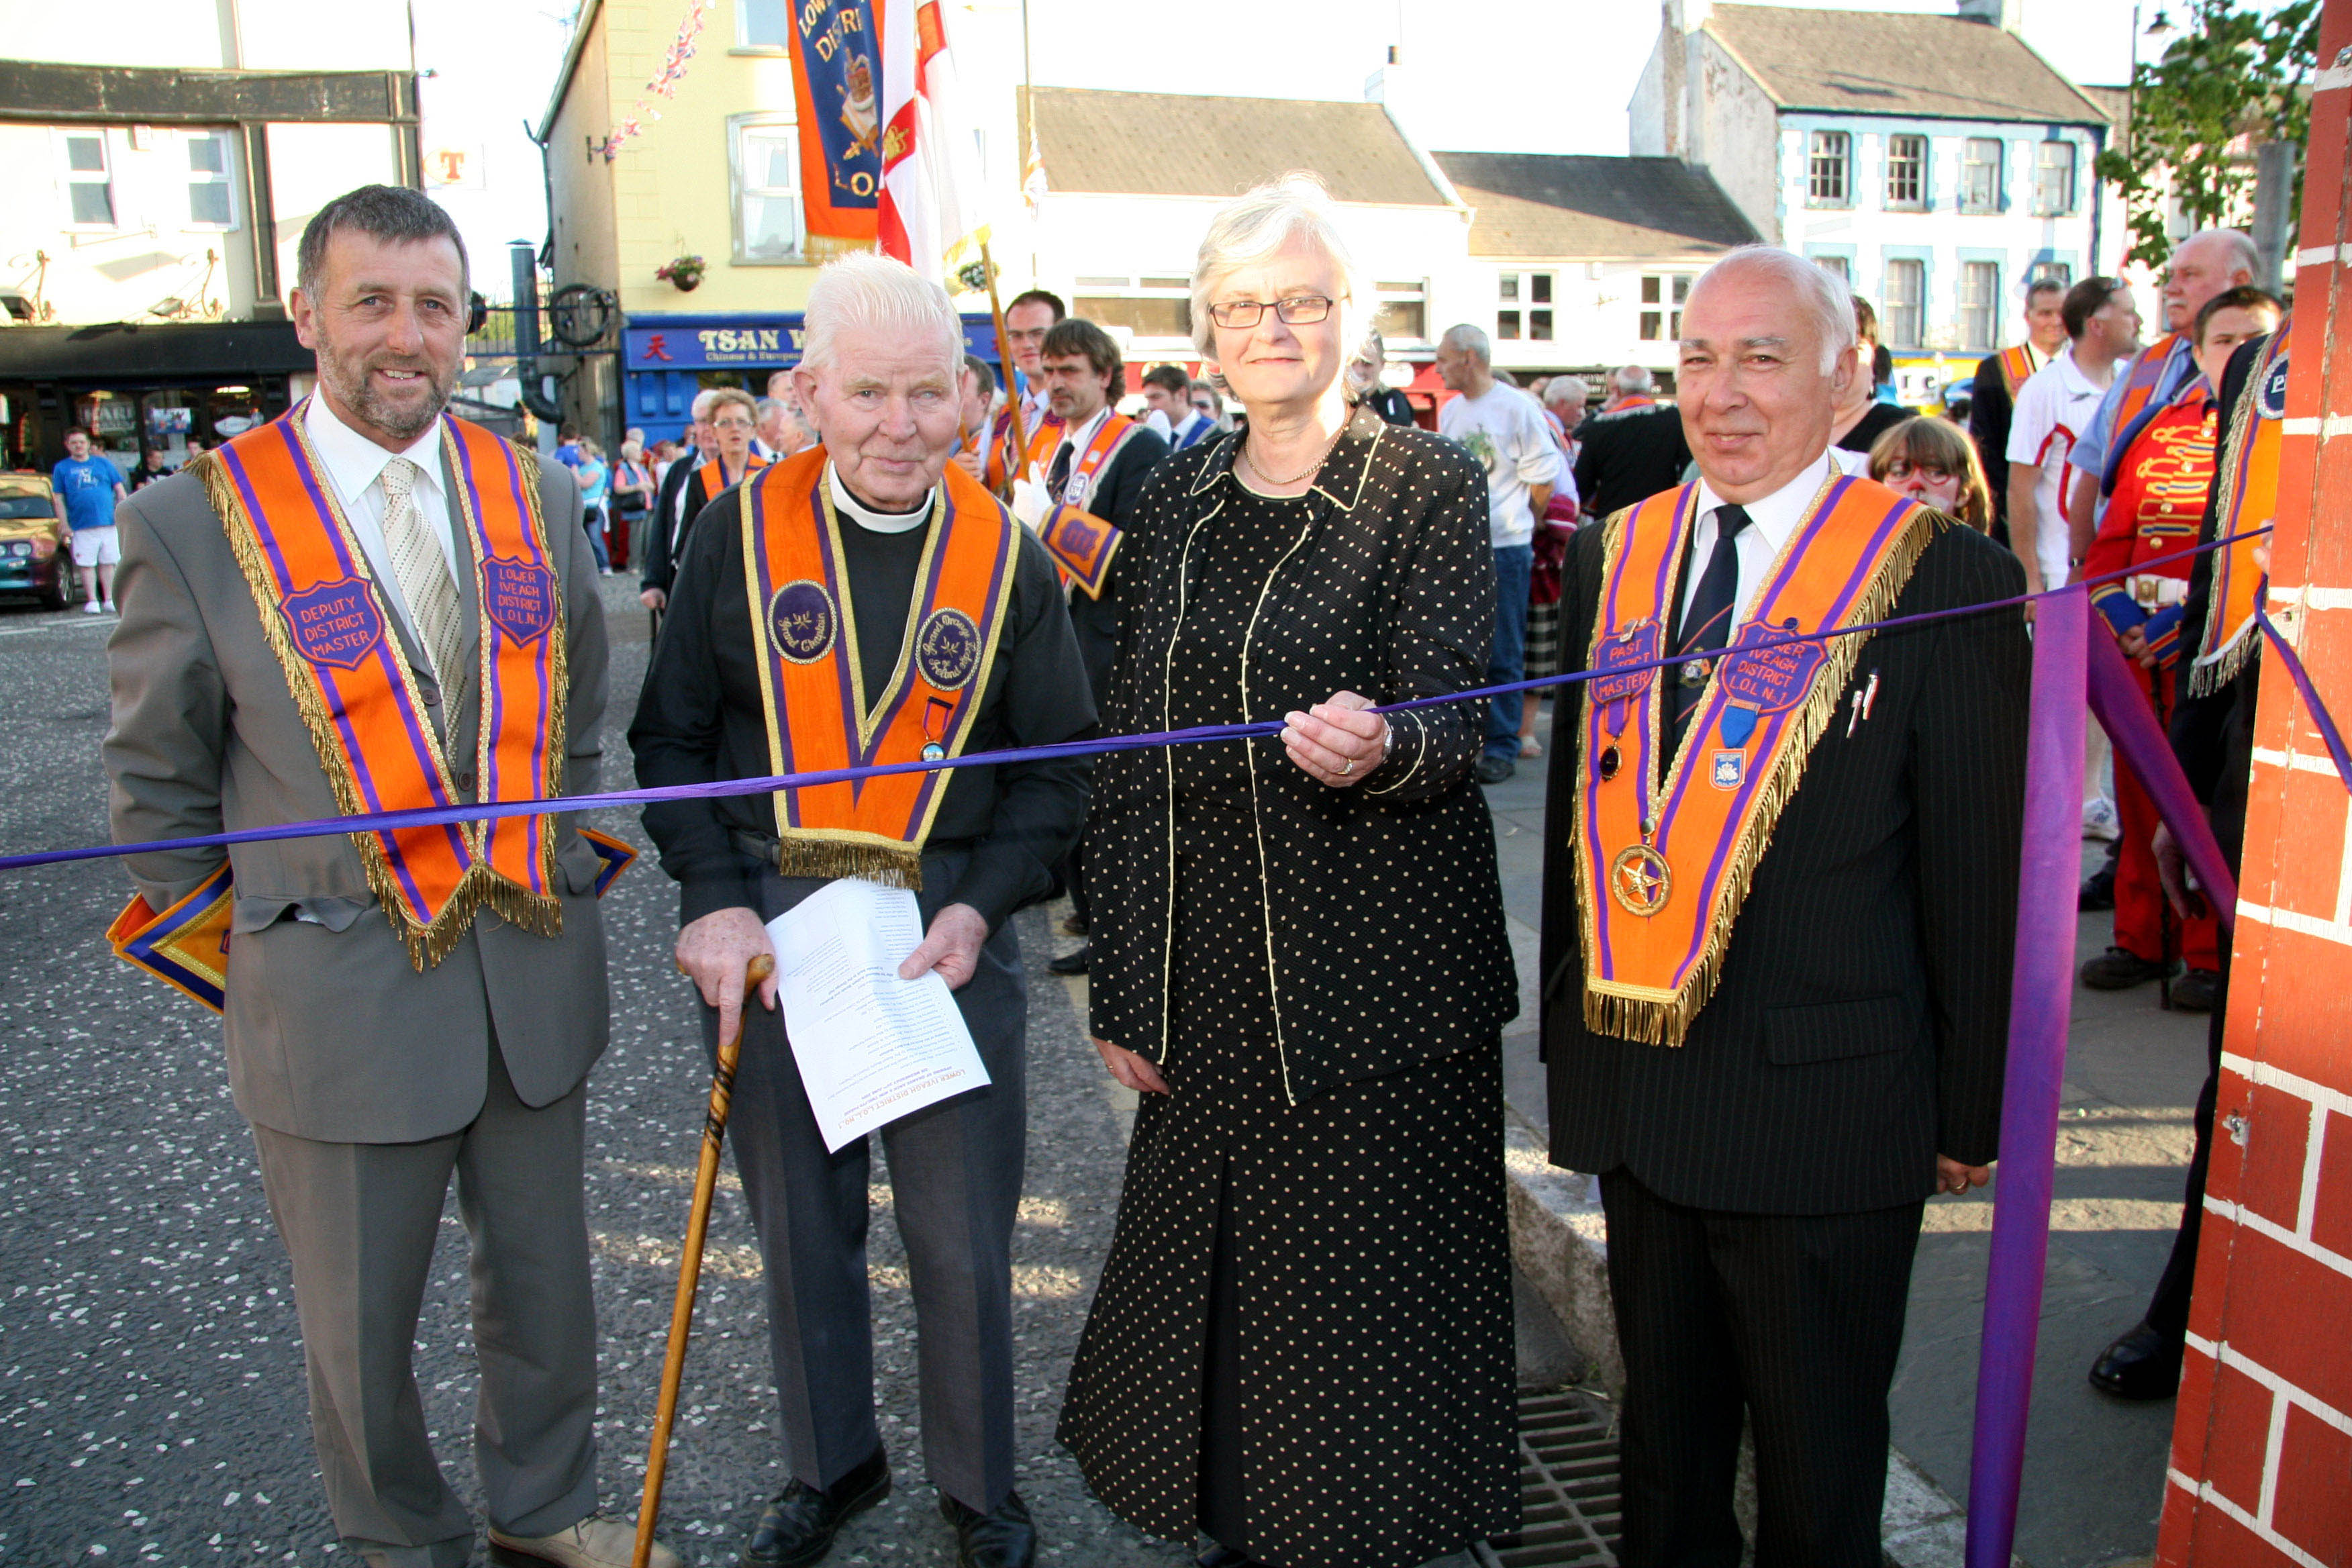 Pictured opening the arch at Dromore on Wednesday 24th June are L to R: Bro Maurice Coburn (Deputy District Master), Bro Rev Gerry Sproule (District Chaplain), Mrs Mary Mattison and Bro Eric Jess (Past District Master).